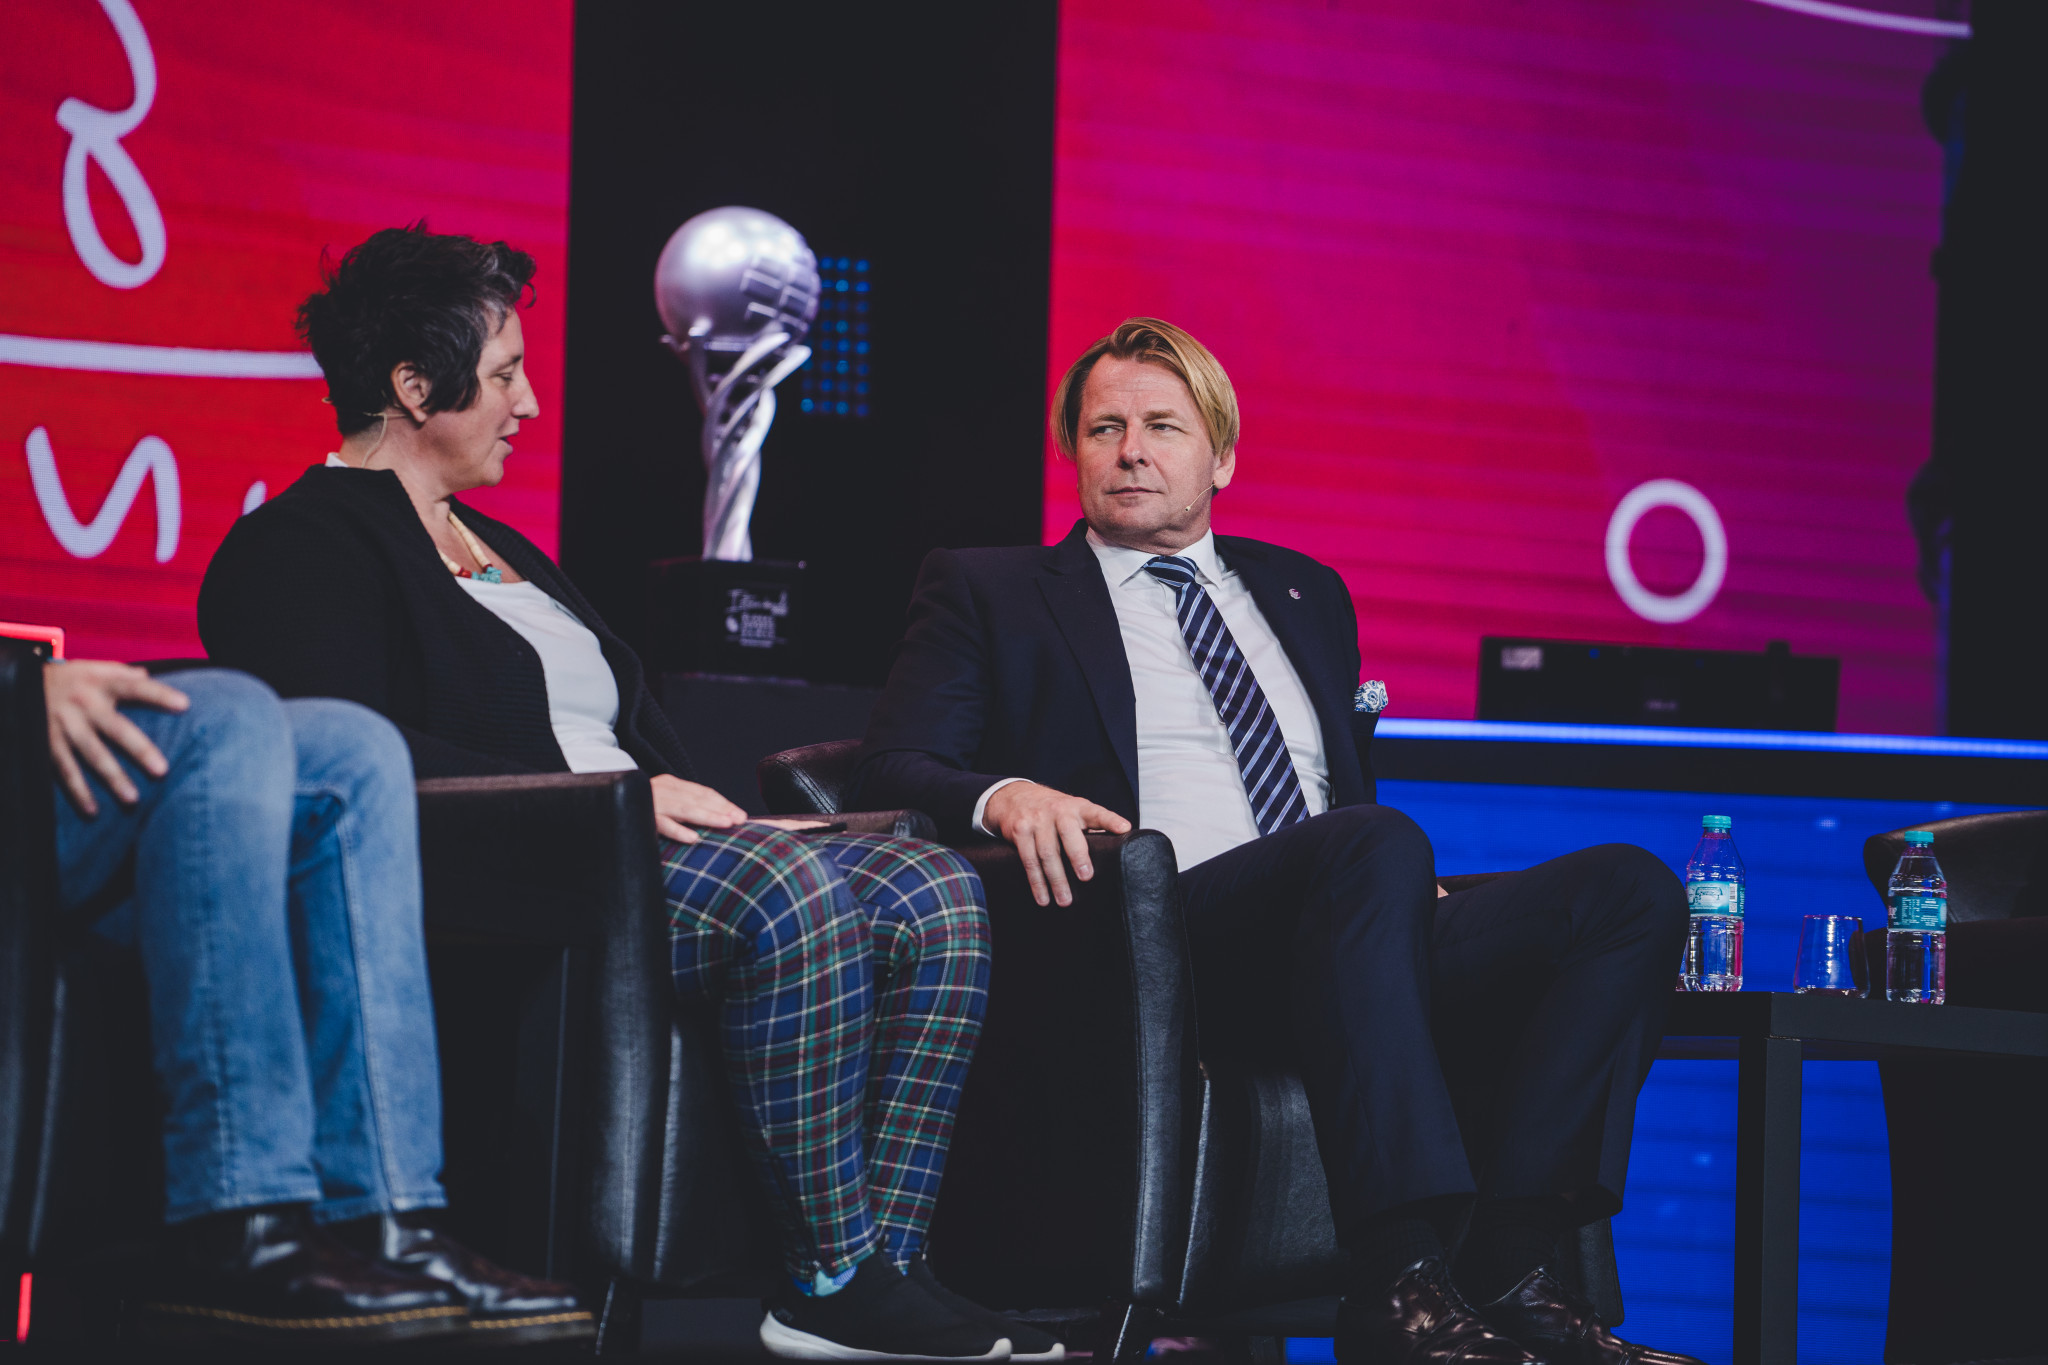 British Esports chief executive Chester King, right, predicted a more diverse and inclusive esports landscape in five years time with more women especially involved in the industry ©British Esports